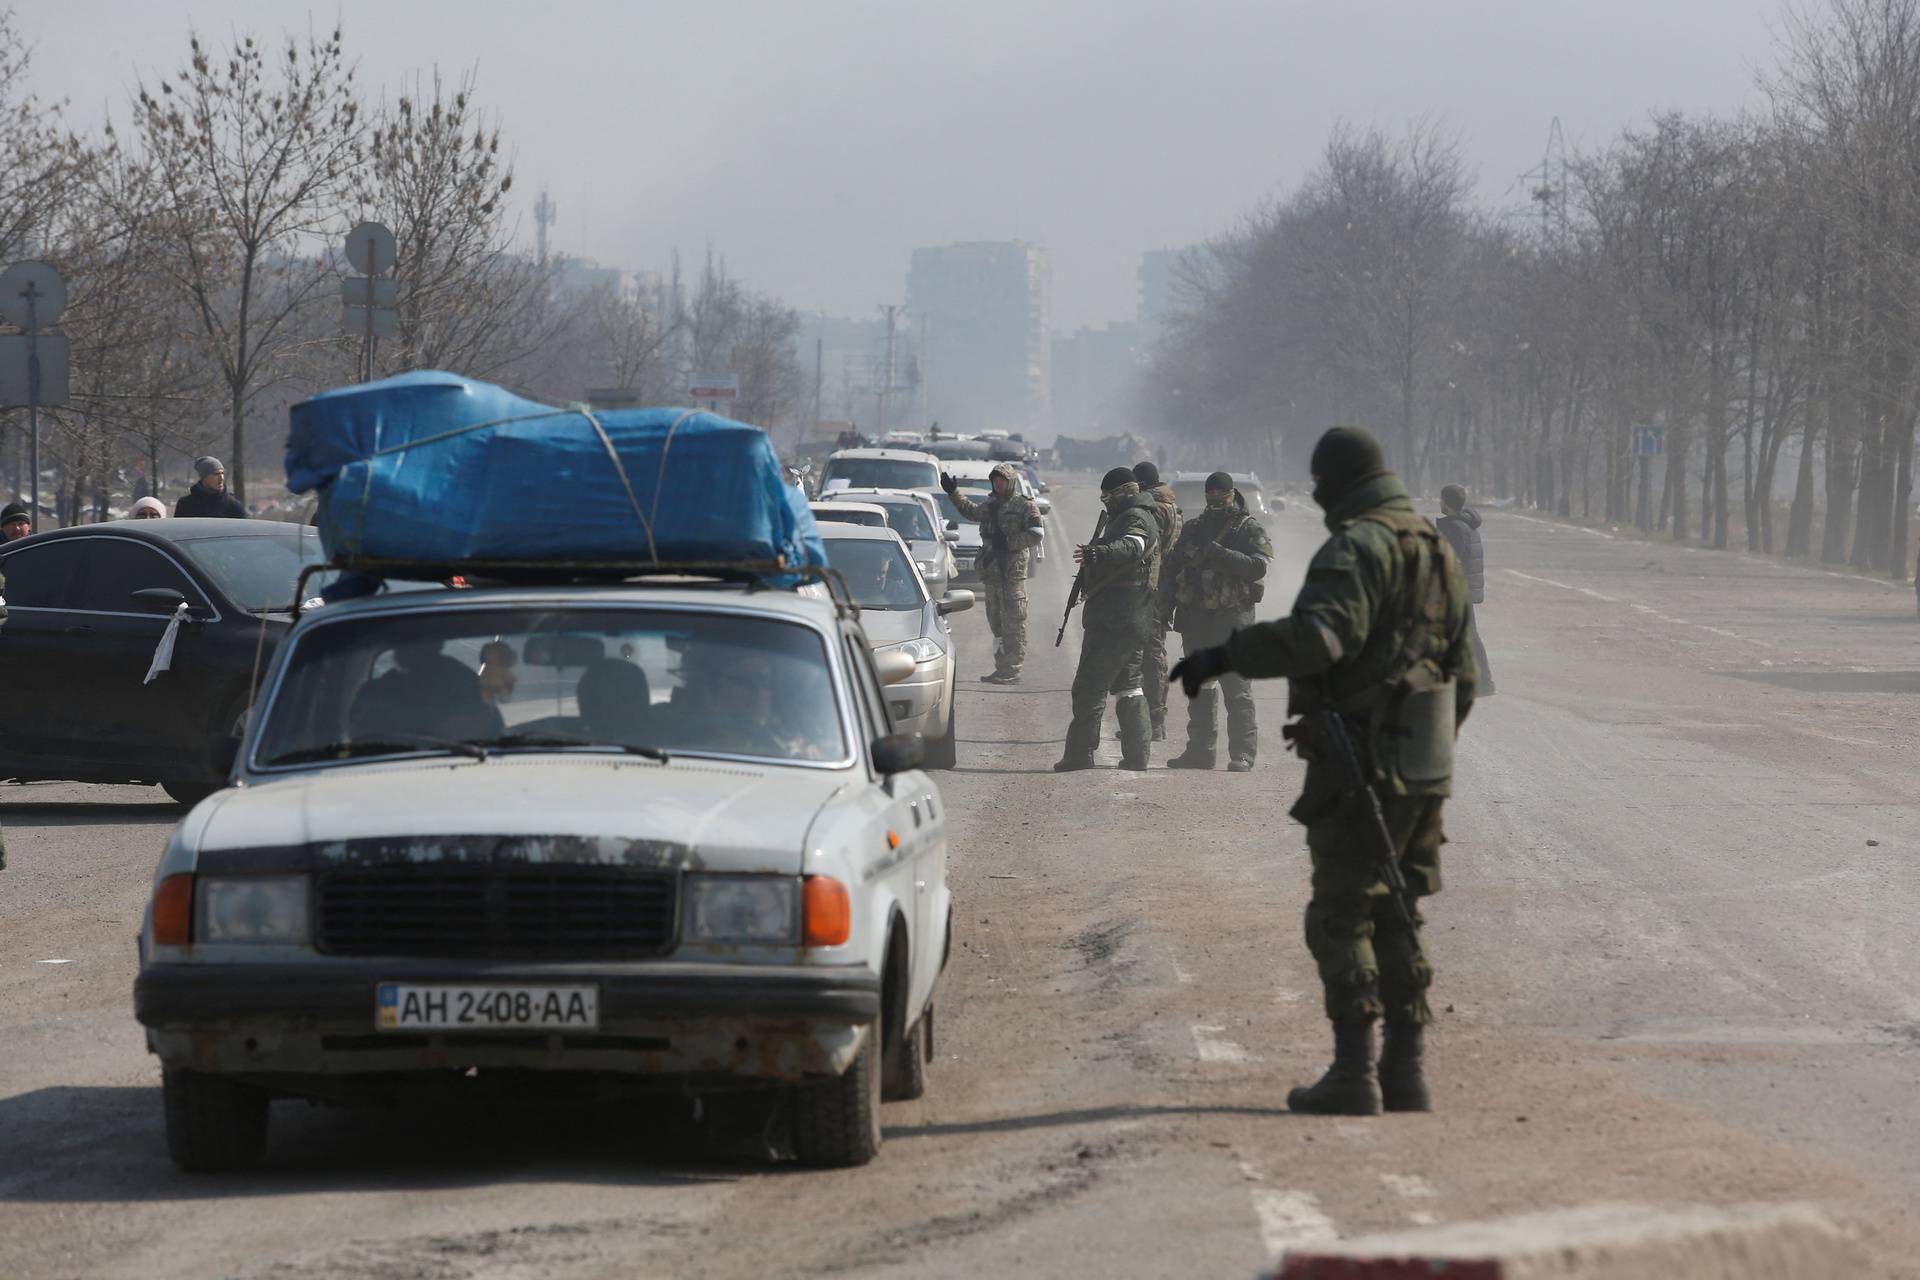 Service members of pro-Russian troops stand guard at a checkpoint in the besieged city of Mariupol